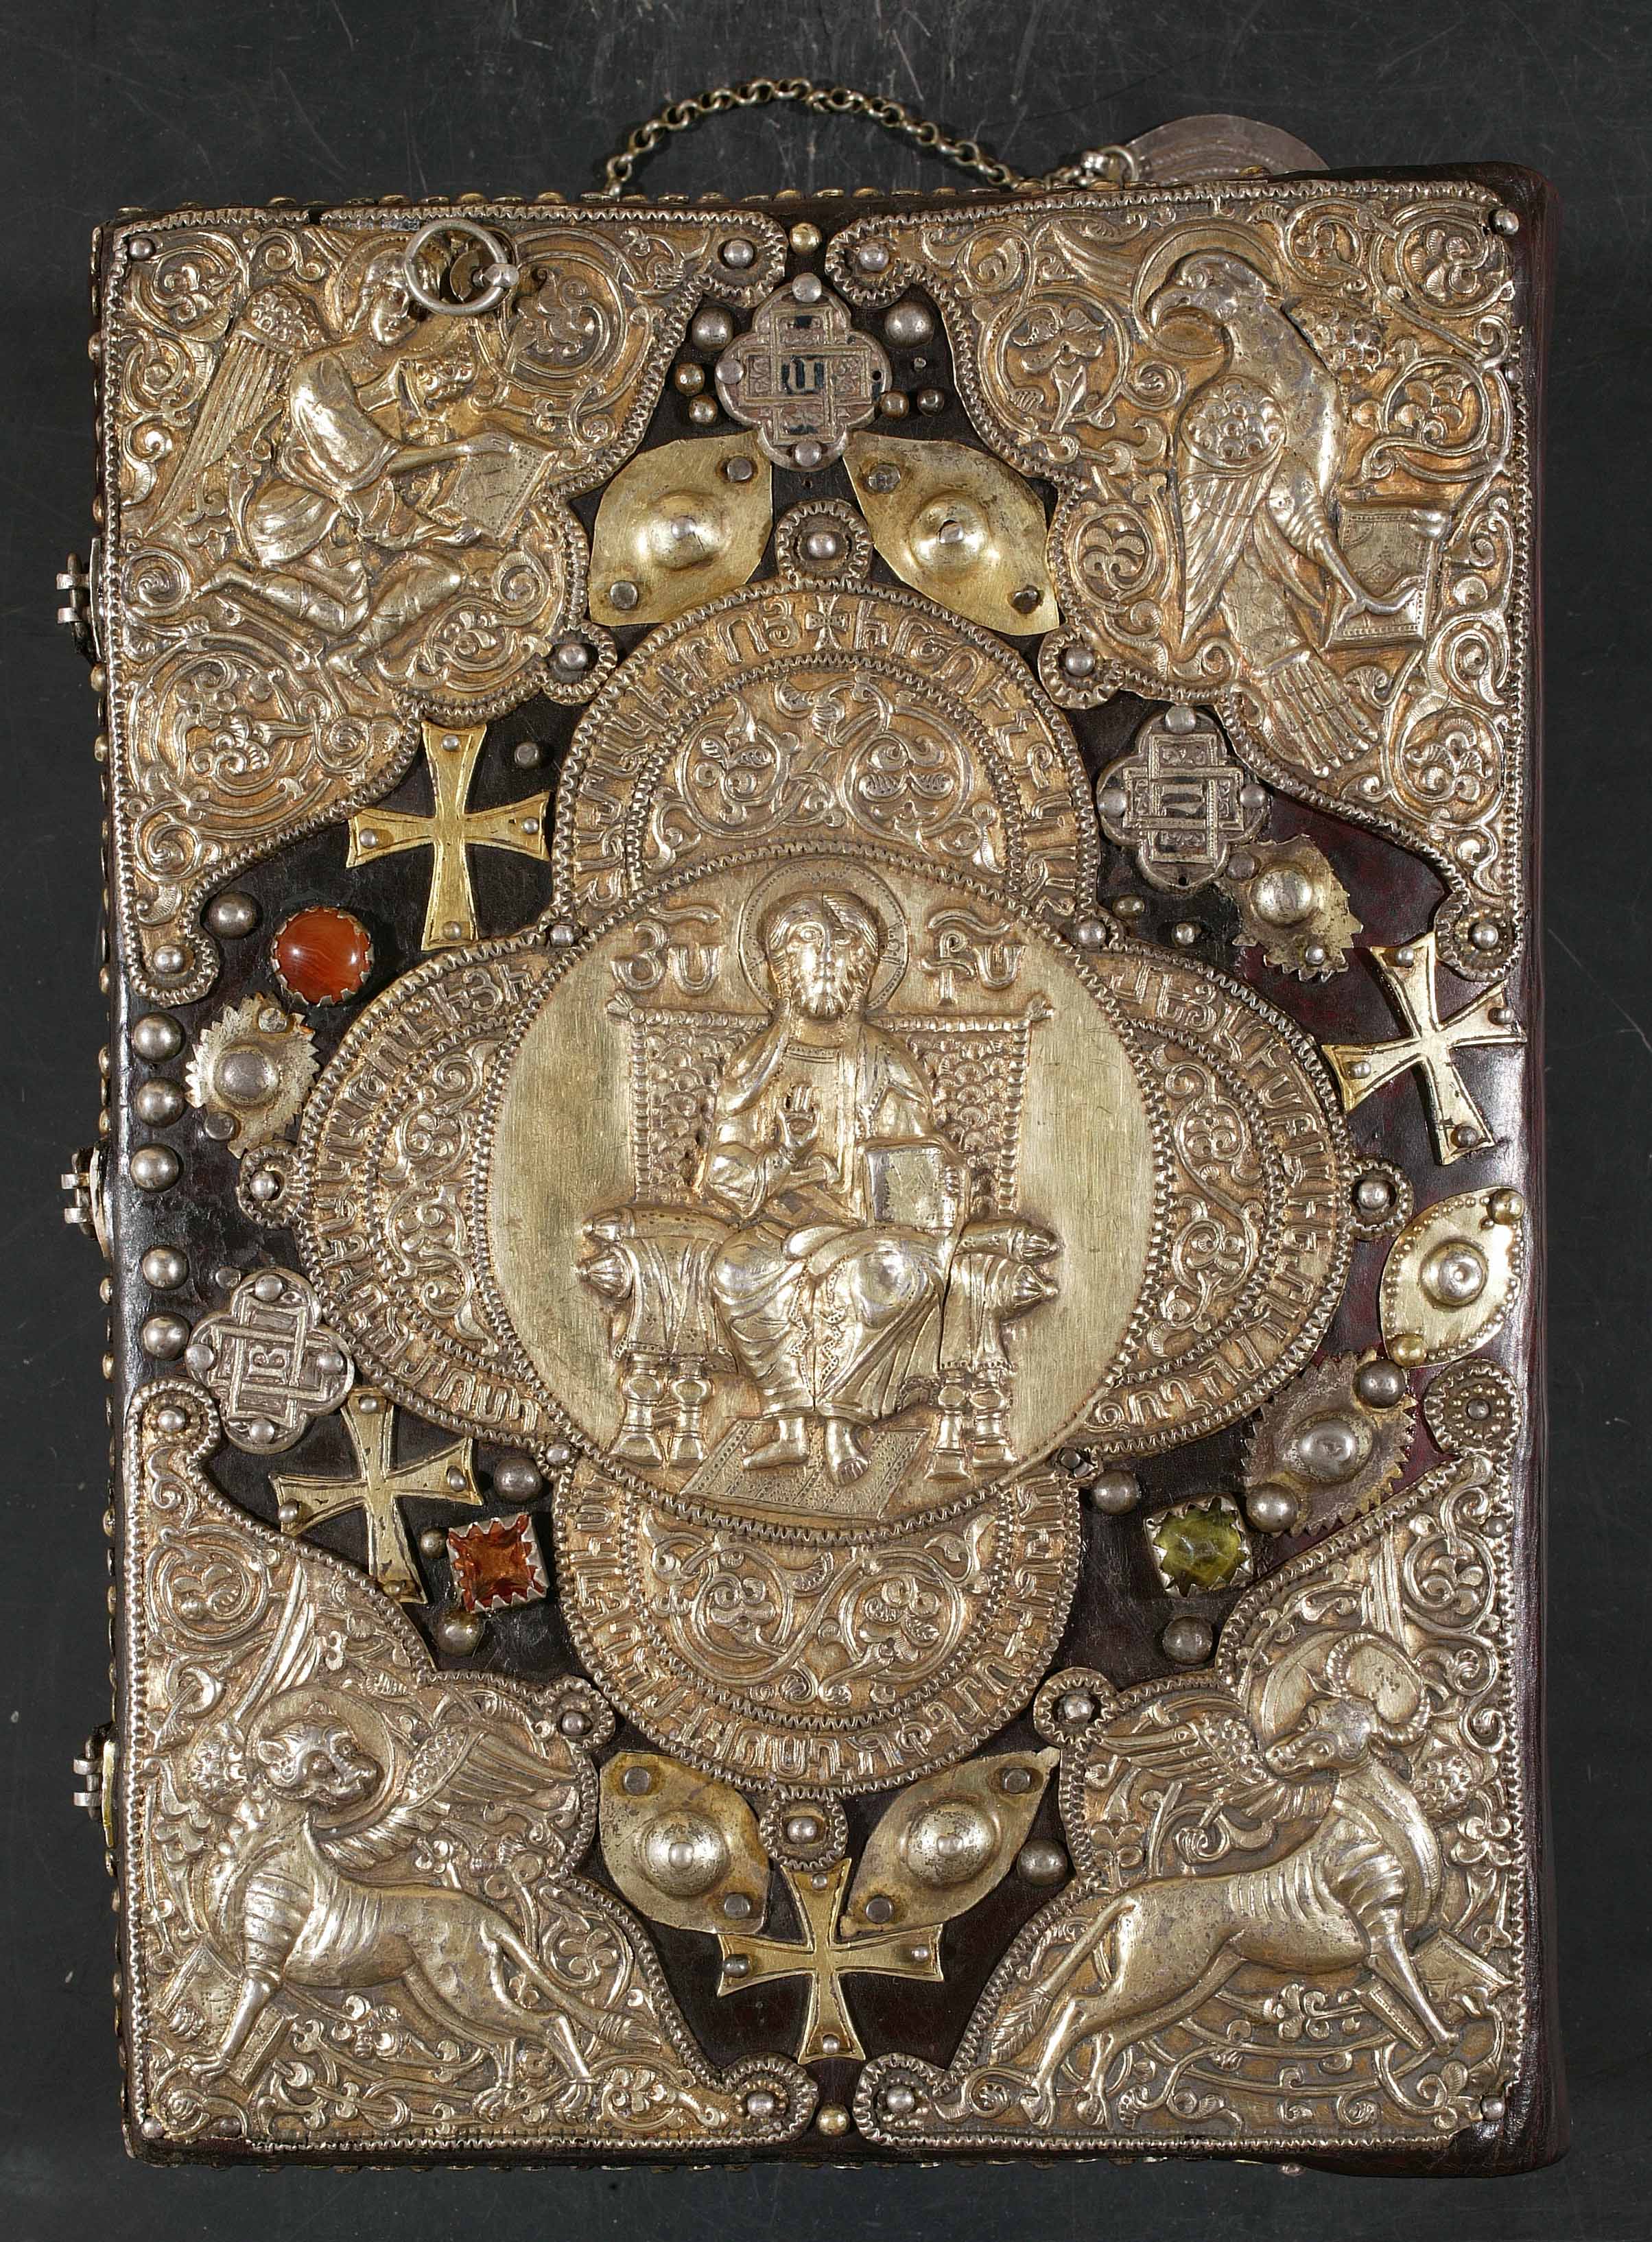 Silver and jeweled covers on a manuscript from the Armenian church of Katʻoghikosutʻiwn Hayotsʻ Metsi Tann Kilikioy, Anṭilyās (<a href='https://w3id.org/vhmml/readingRoom/view/510608'>ACC 8</a>)